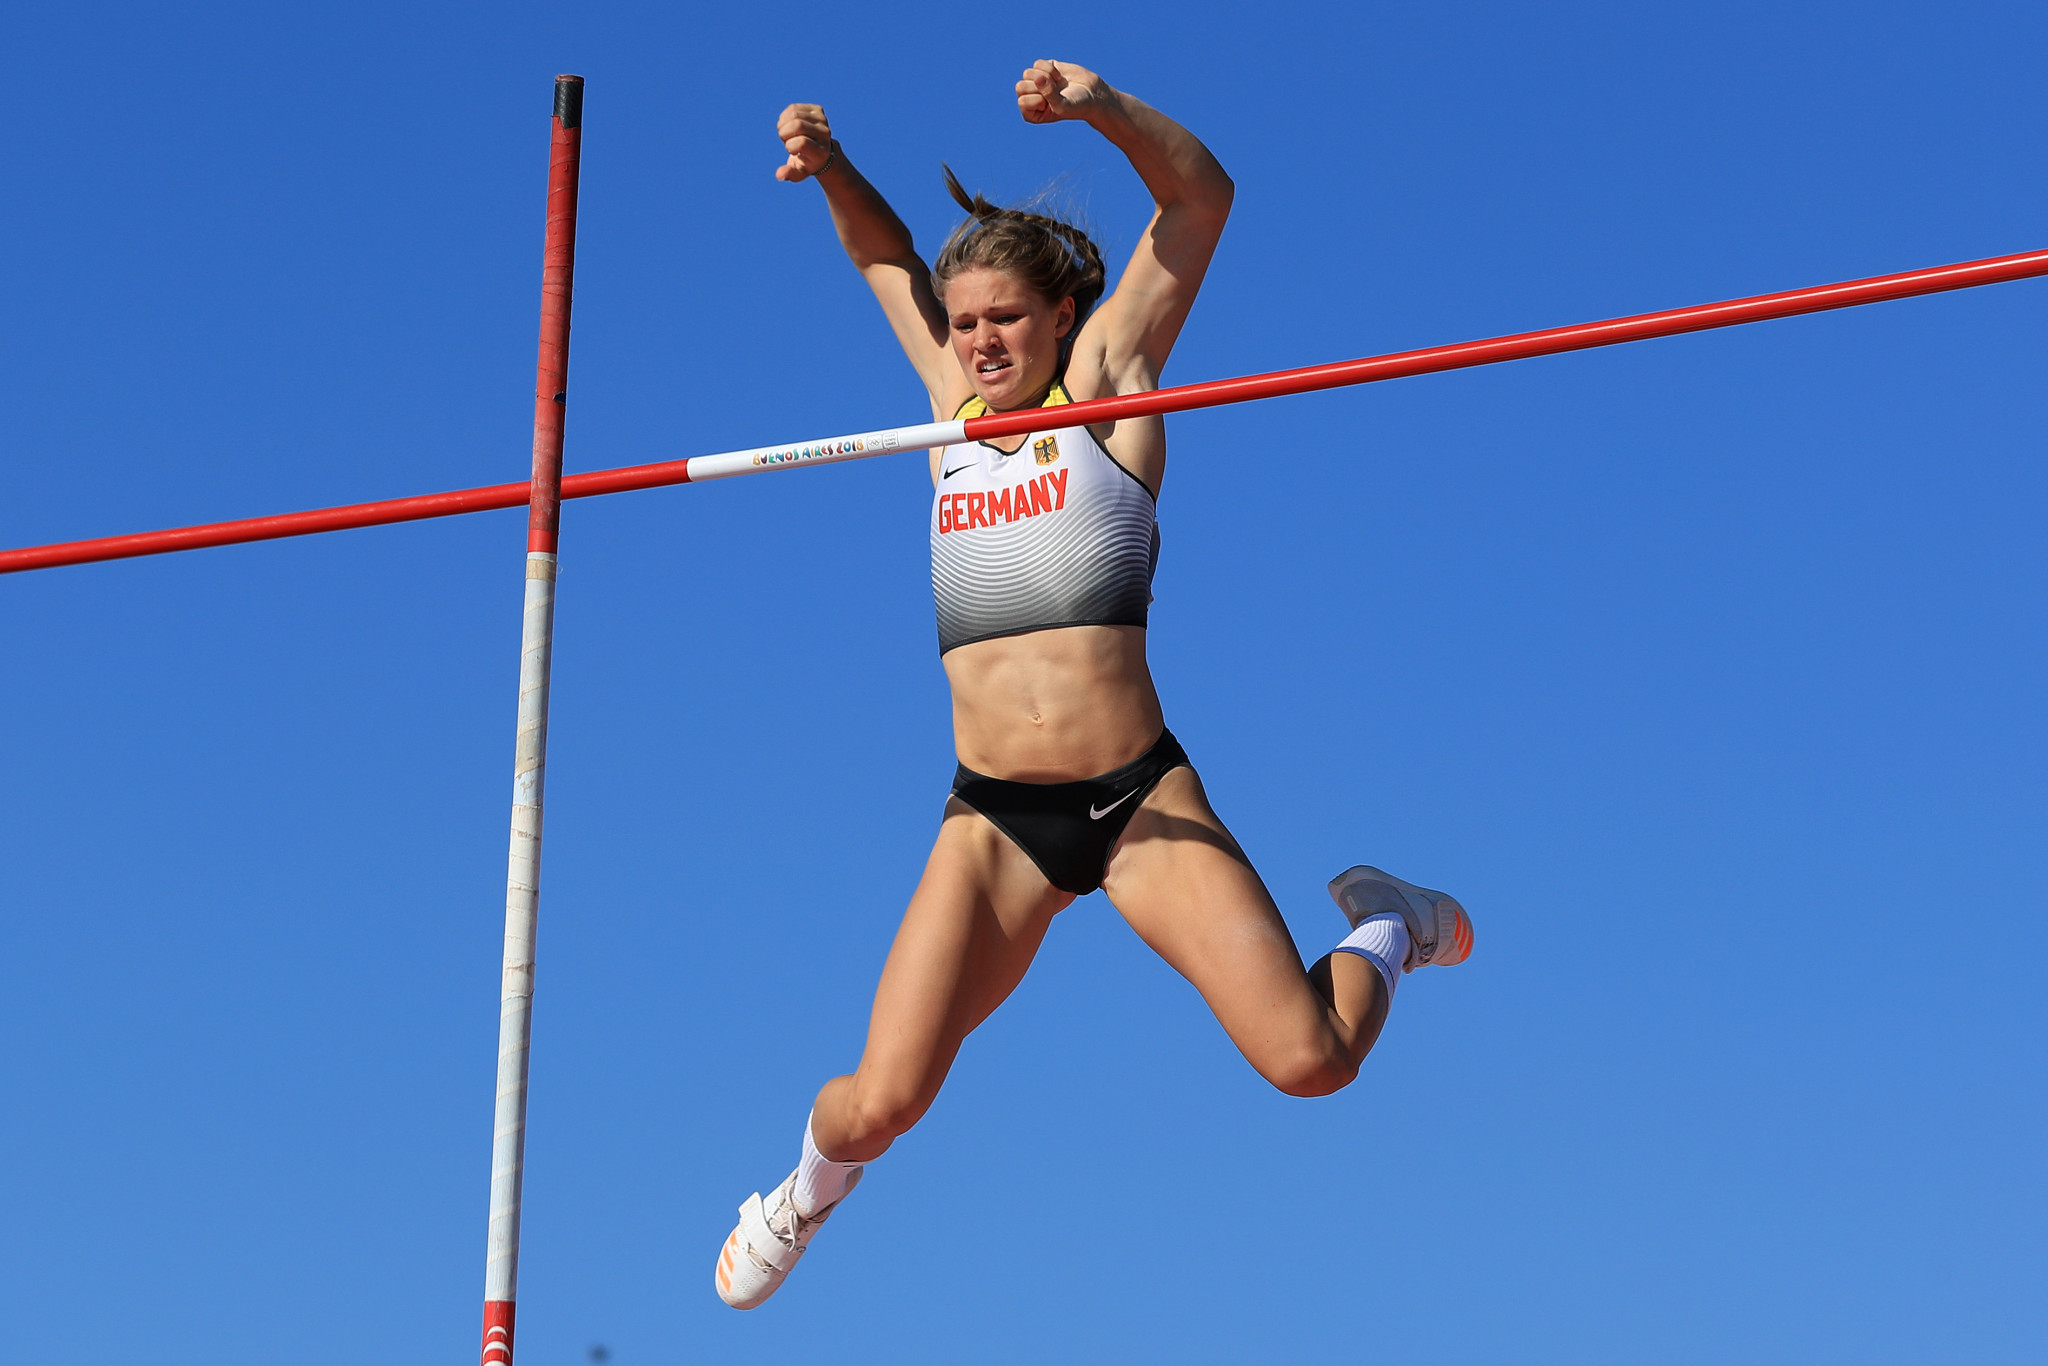 Leni Freyja Wildgrube secured pole vault gold for Germany ©Getty Images